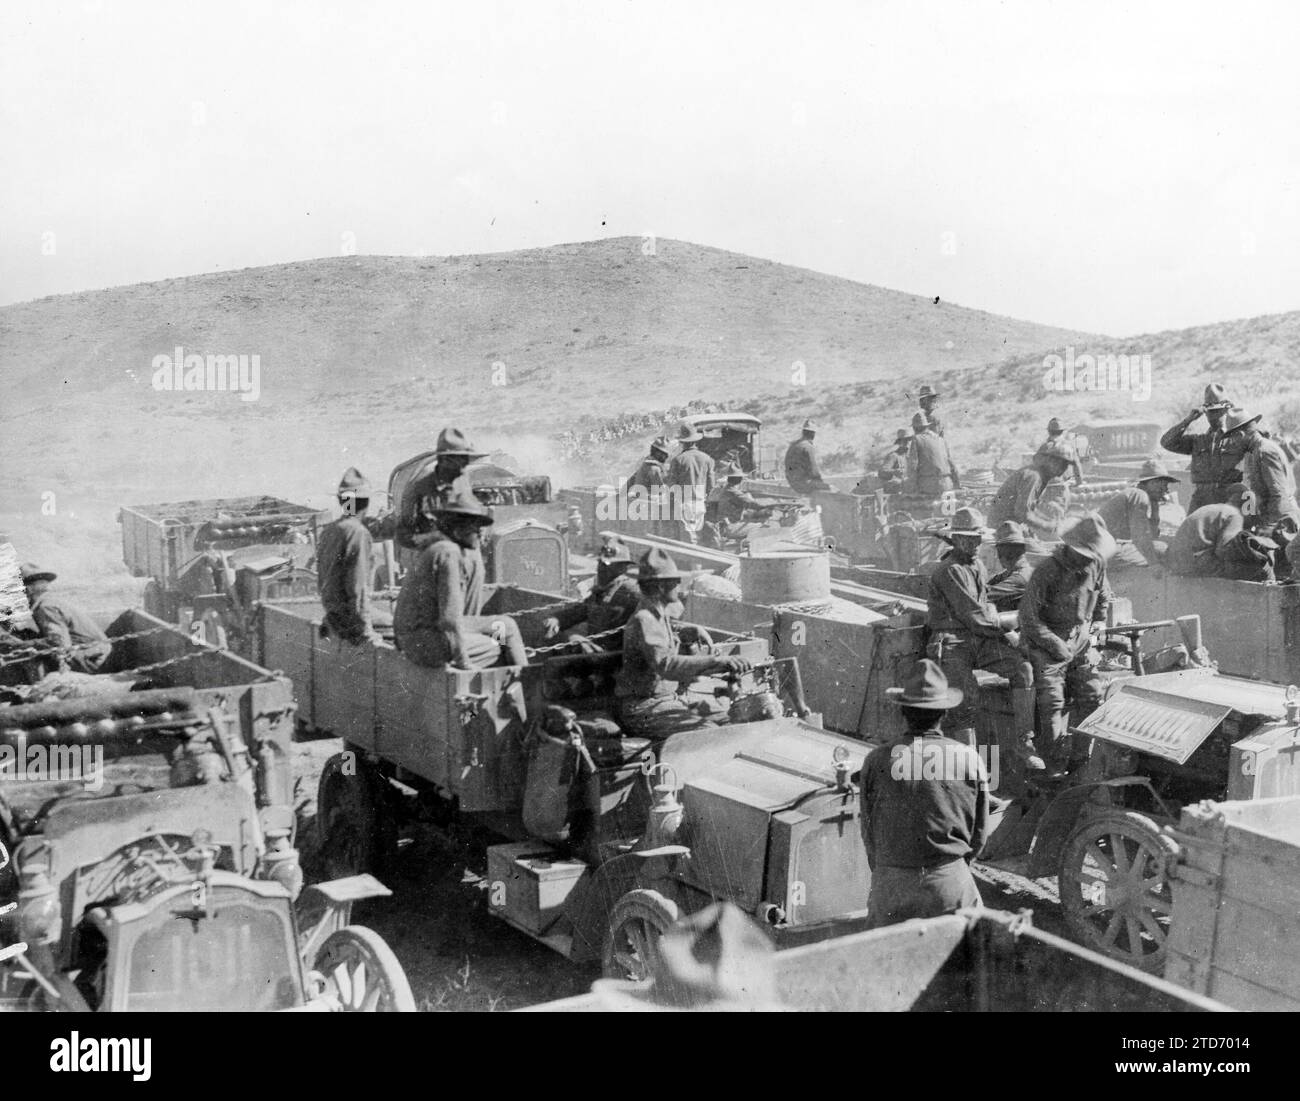 06/30/1916. Elements of the North American army. Trucks Automobiles Dedicated to the transportation of Ammunition. Credit: Album / Archivo ABC / Underwood & Underwood Stock Photo